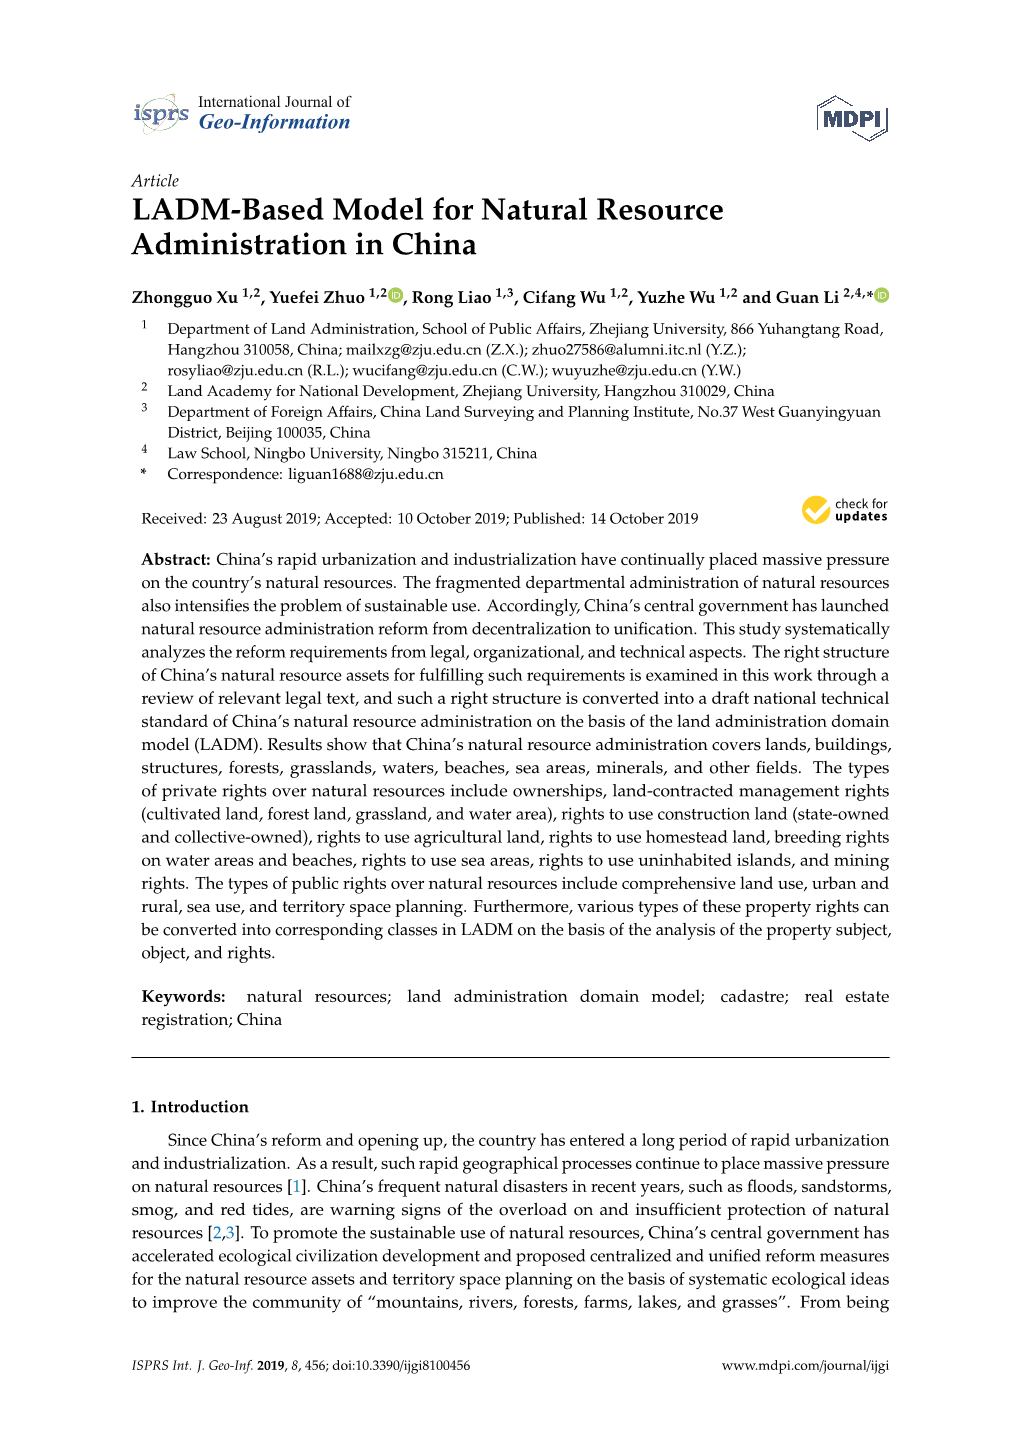 LADM-Based Model for Natural Resource Administration in China